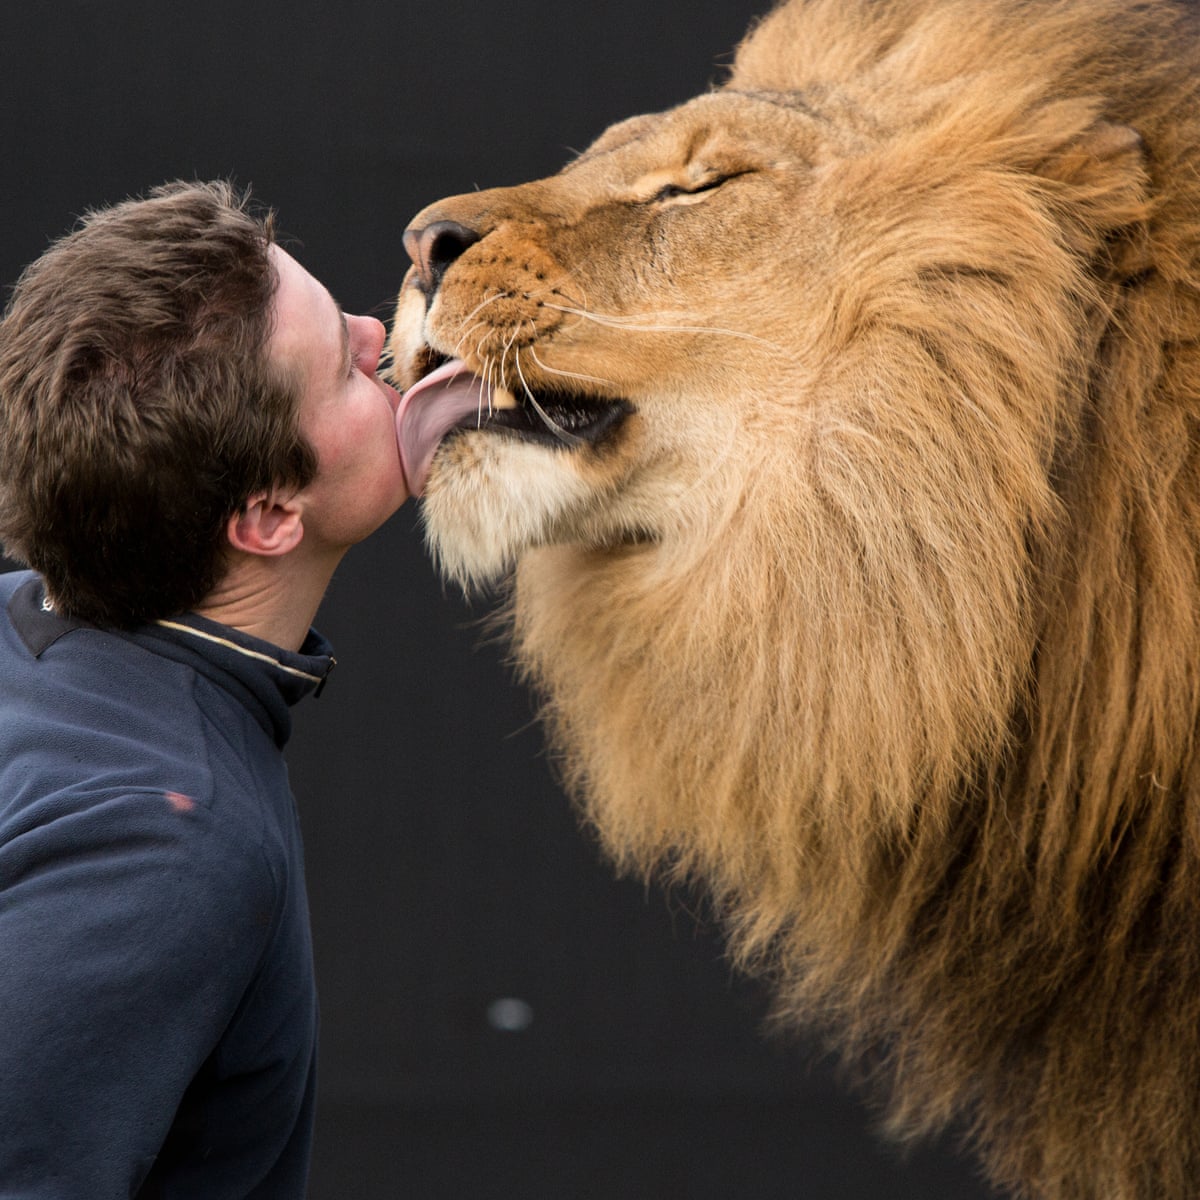 Britain's last lion tamer: 'It's not the archaic Victorian practice people  imagine' | Circus | The Guardian